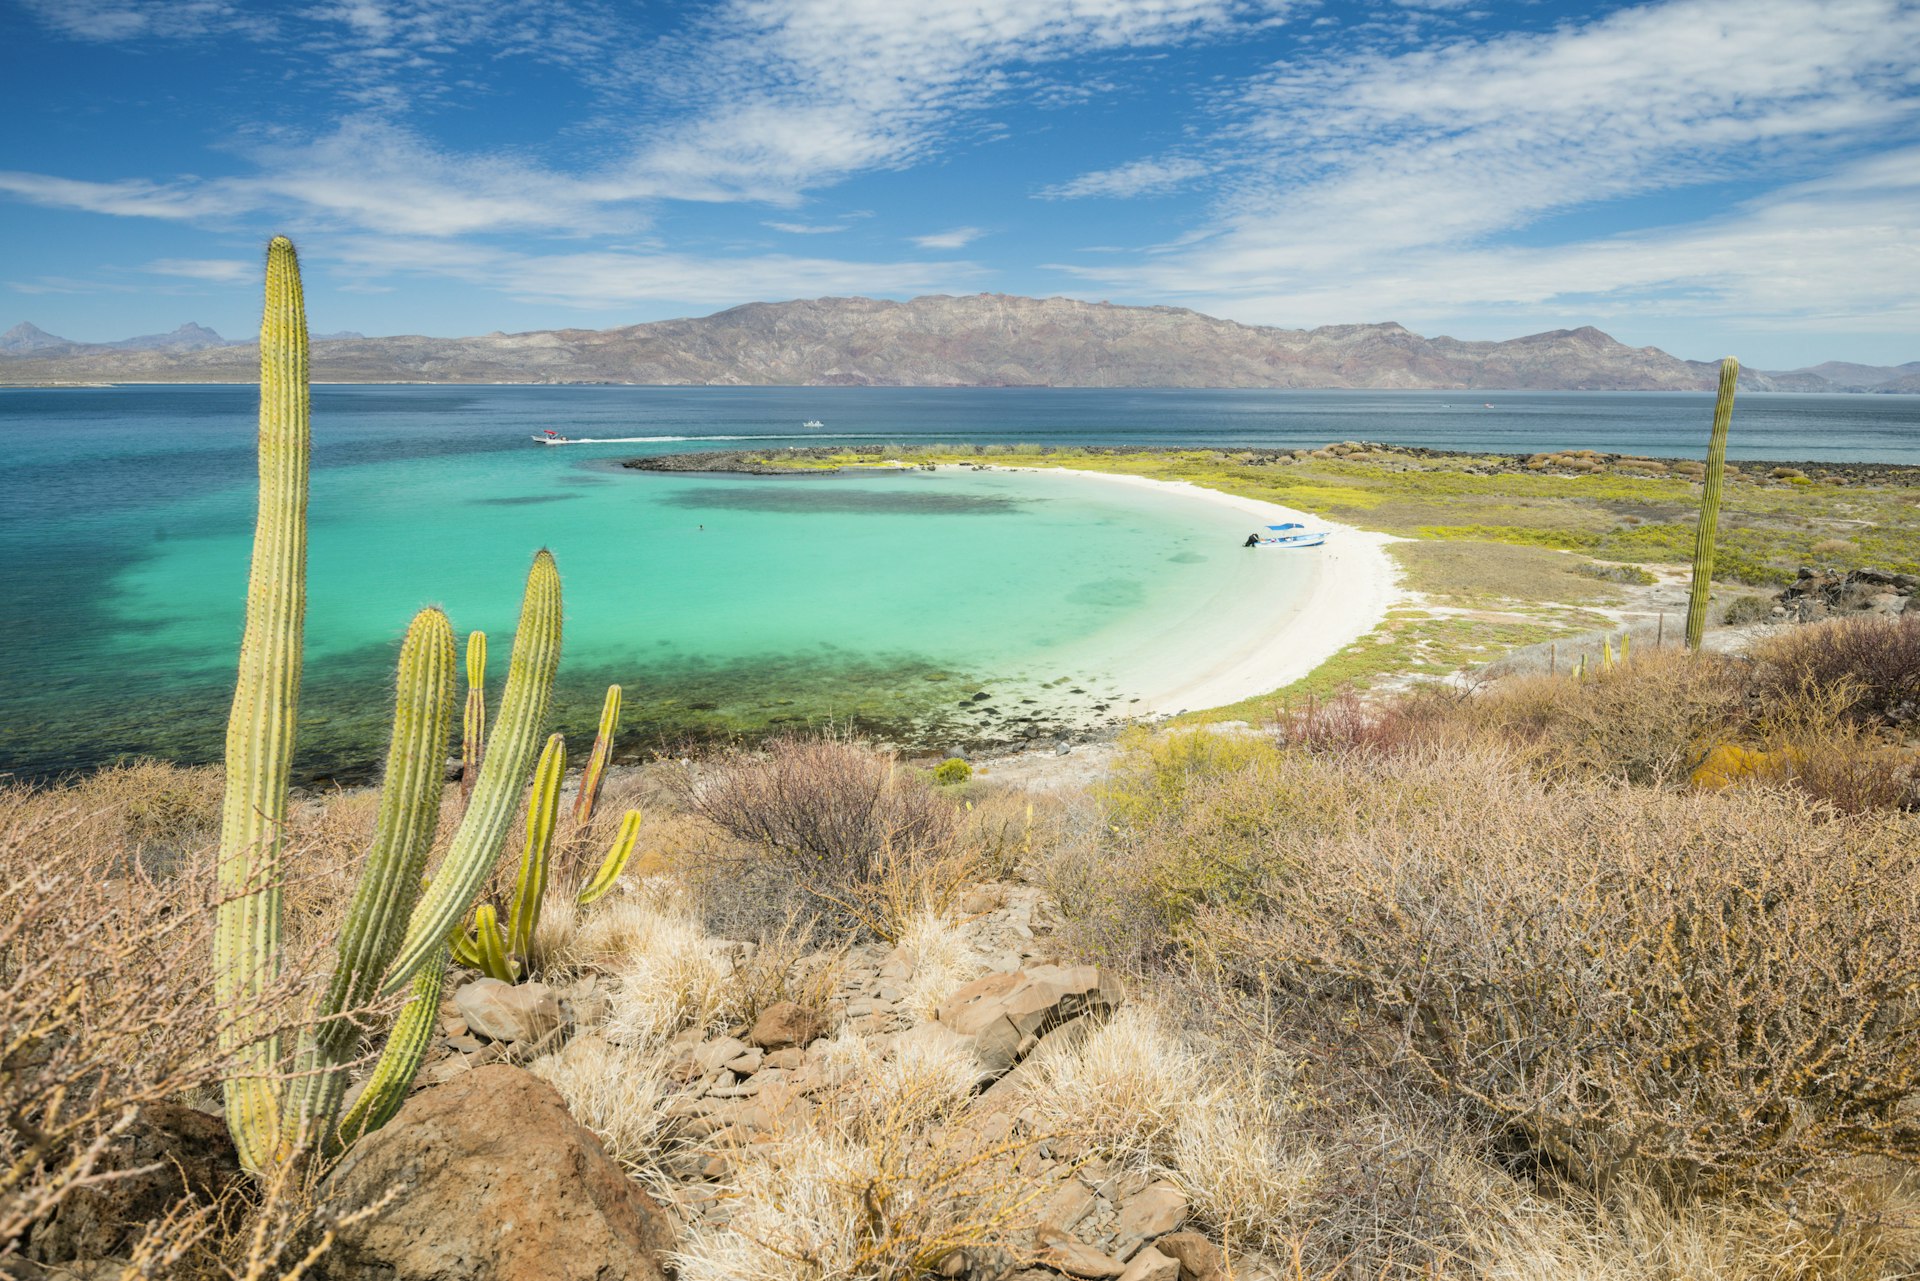 A curve of white sand with turquoise sea surrounding a small peninsula. In the foreground is wild grass and a cactus standing tall